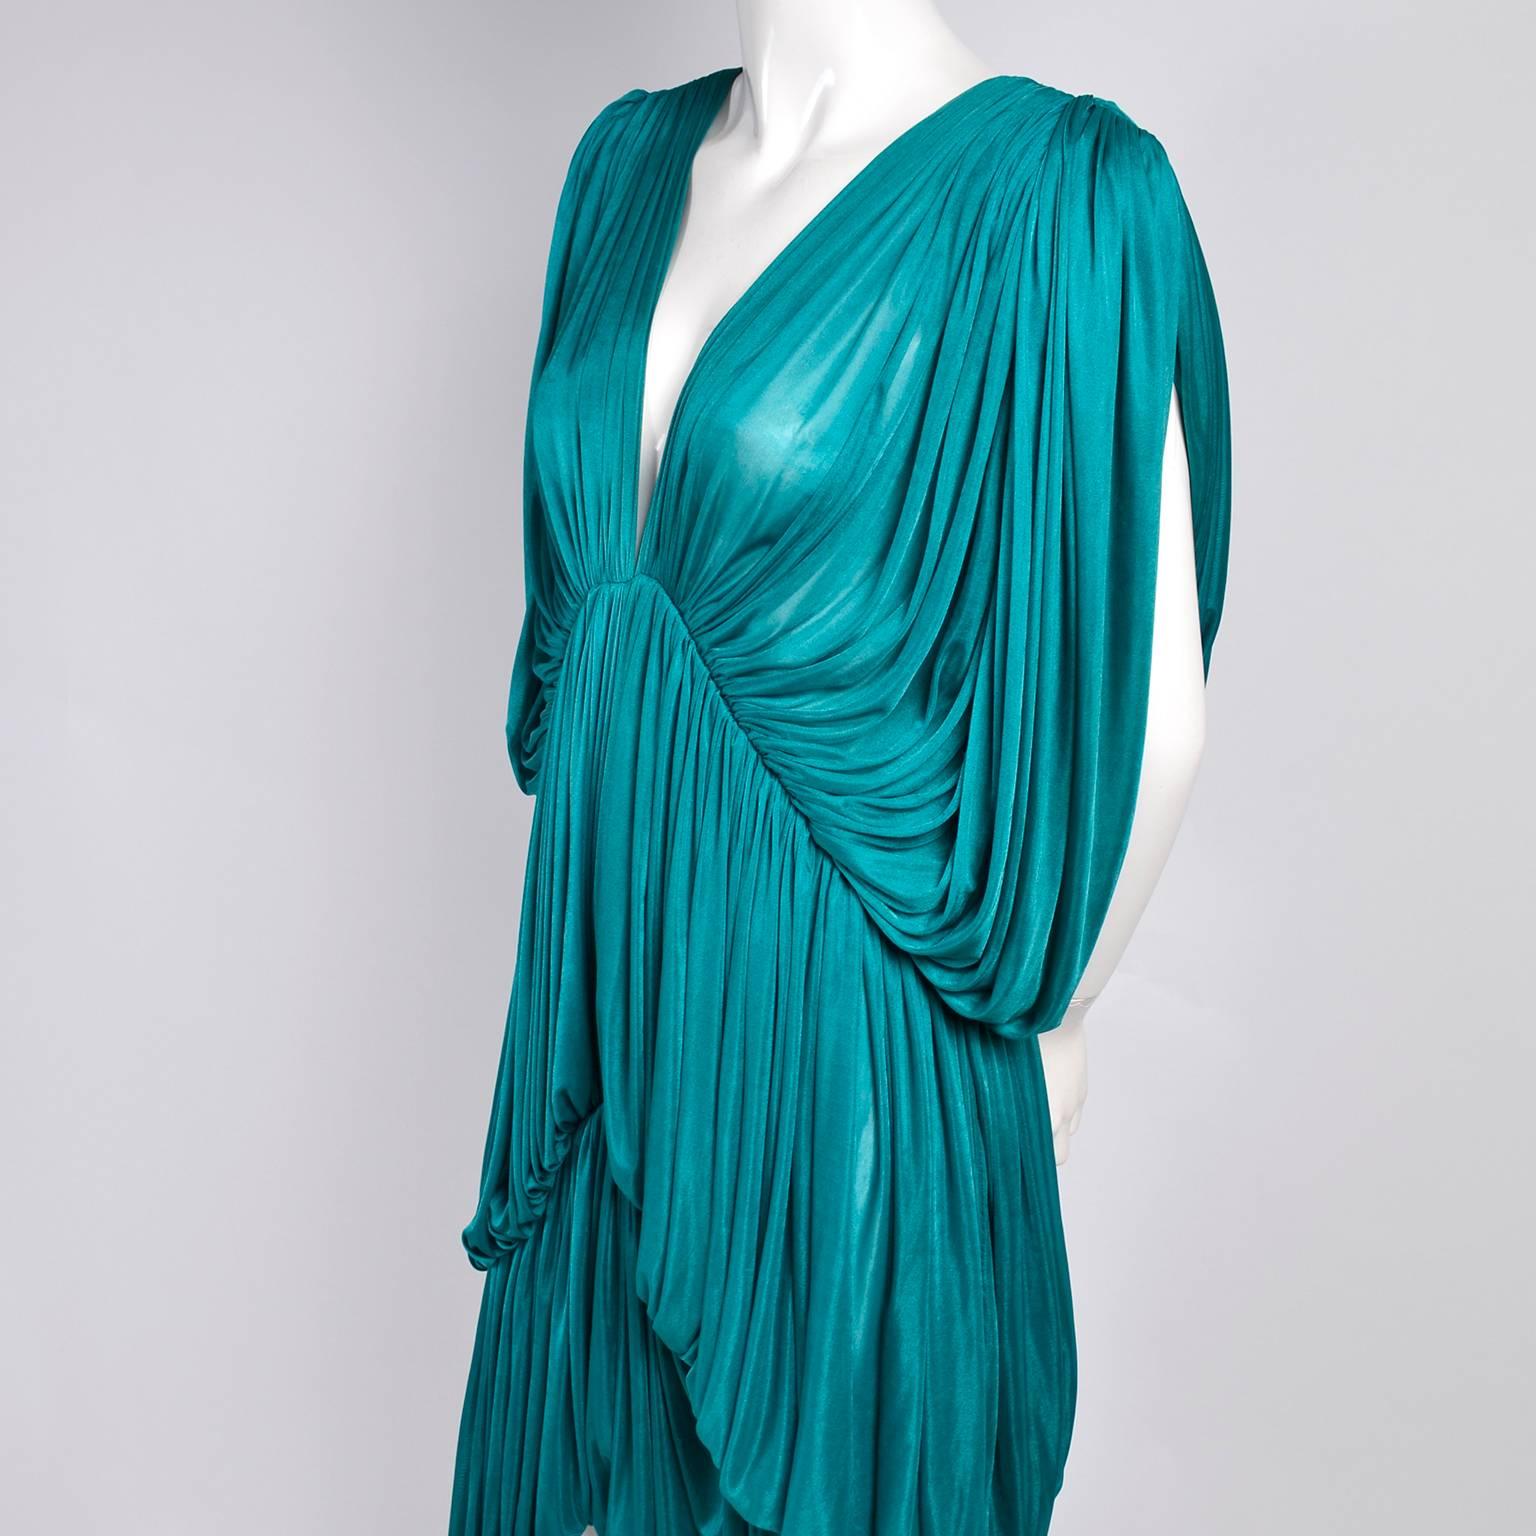 This is an outstanding, rare vintage dress from one of our favorite designers, Norma Kamali. This Norma Kamali OMO butterfly dress is from 1978 and a version of this dress is in the MET museum. This dress has three tiers of gorgeous pleated fine